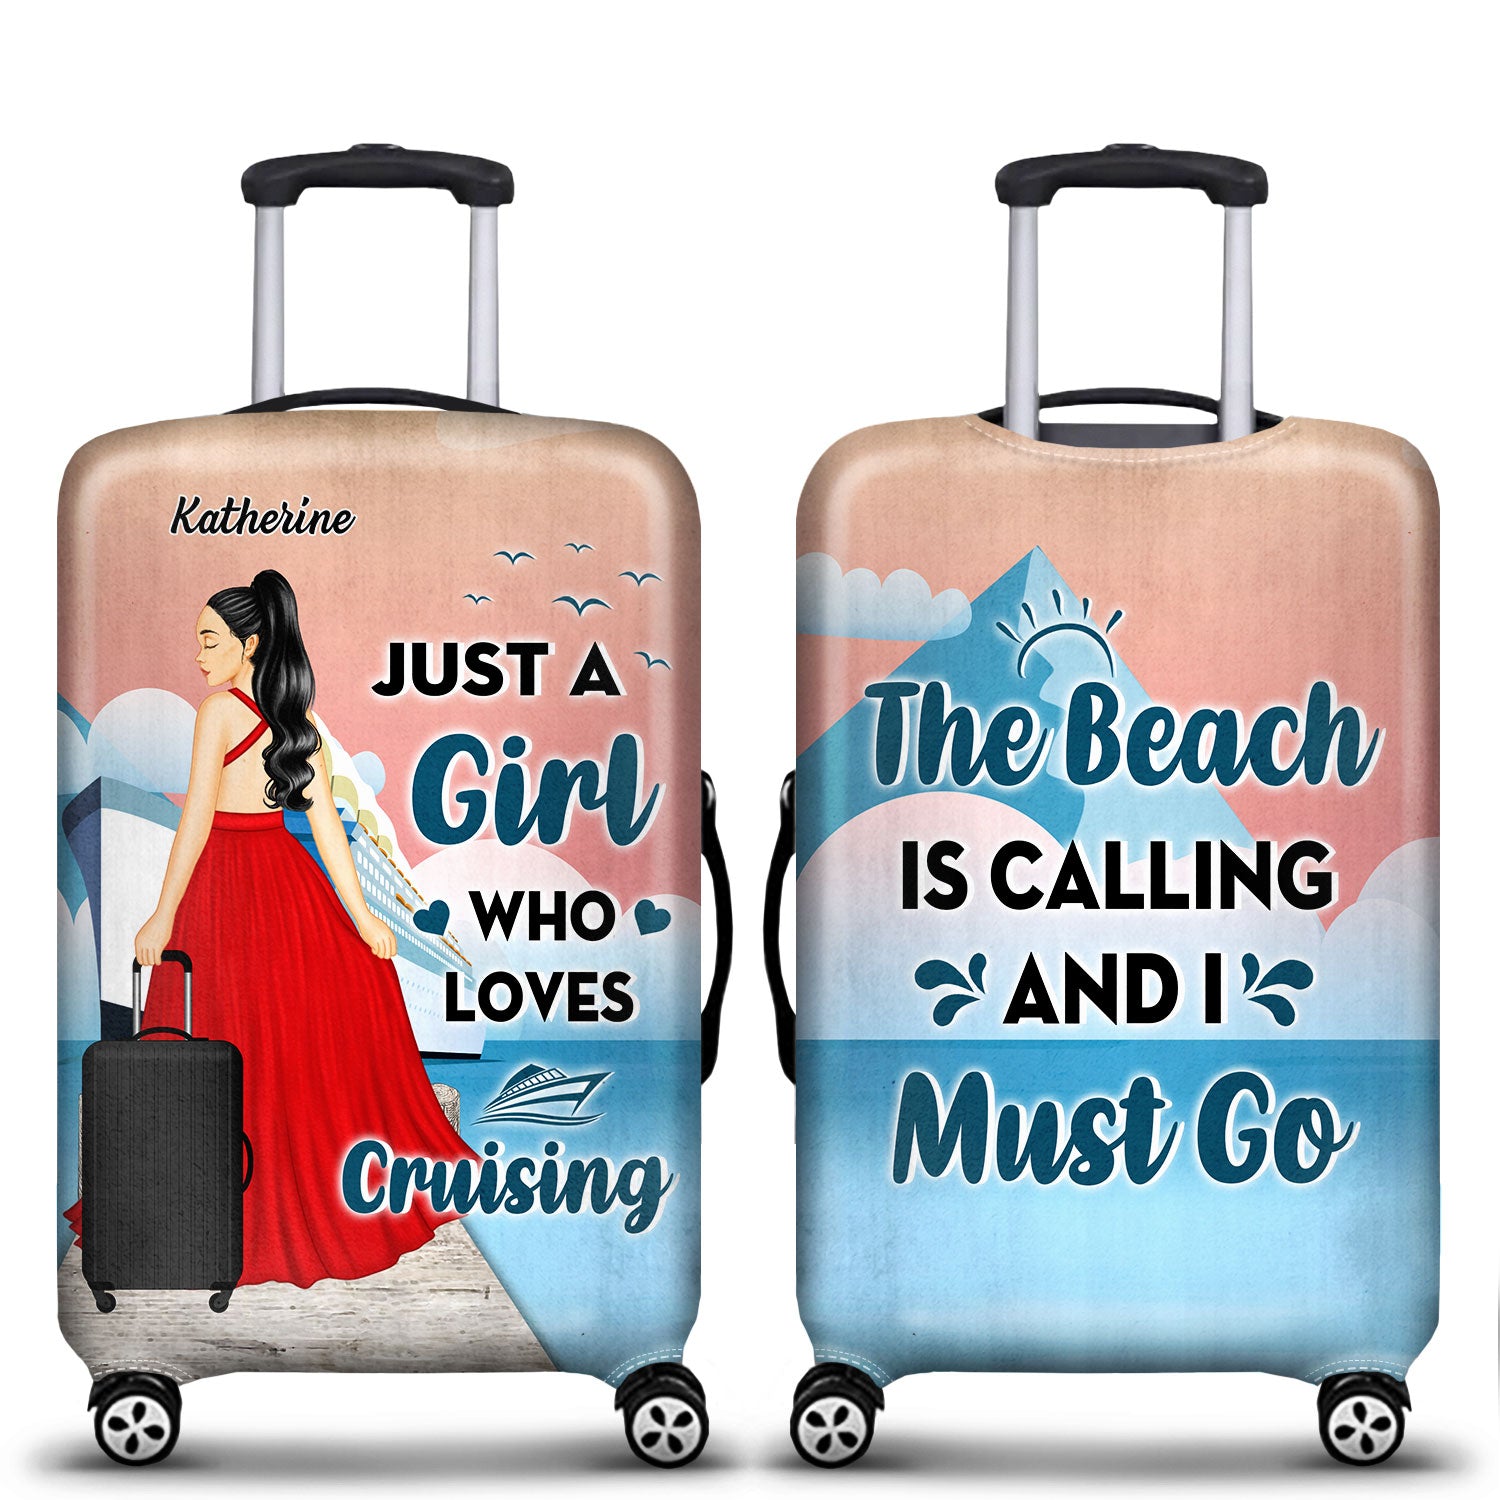 Just A Girl Who Loves Cruising - Gift For Travel Cruising Lovers - Personalized Custom Luggage Cover